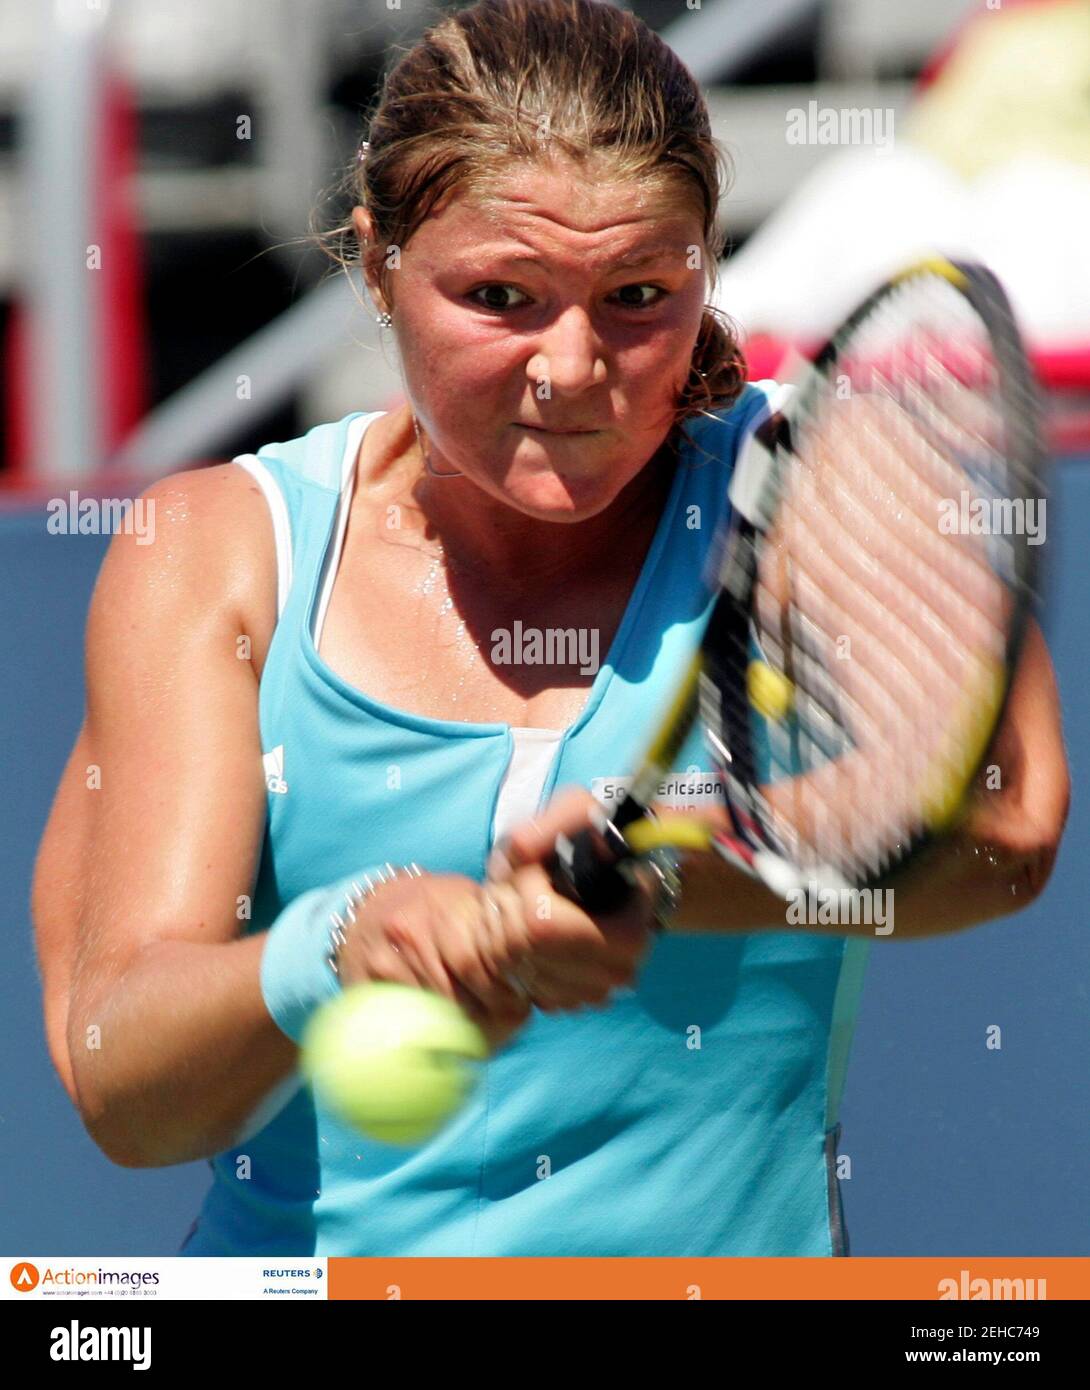 Tennis - Rogers Cup, Sony Ericsson WTA Tour - Montreal, Canada - 18/8/06  Dinara Safina of Russia returns a shot   Mandatory Credit: Action Images / Chris Wattie  Livepic Stock Photo